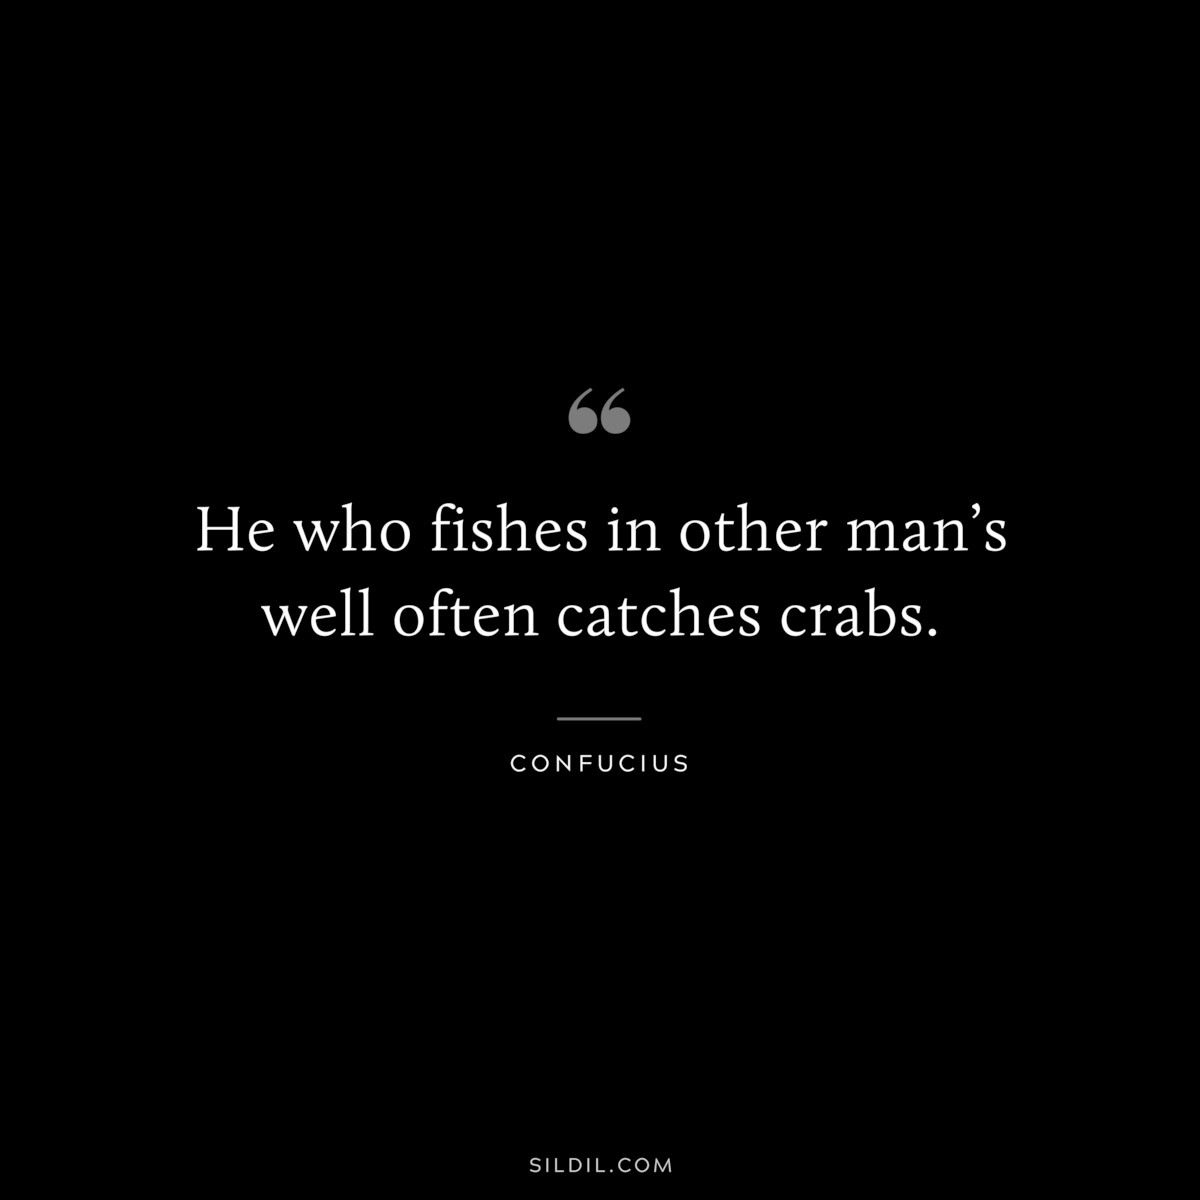 He who fishes in other man’s well often catches crabs. ― Confucius